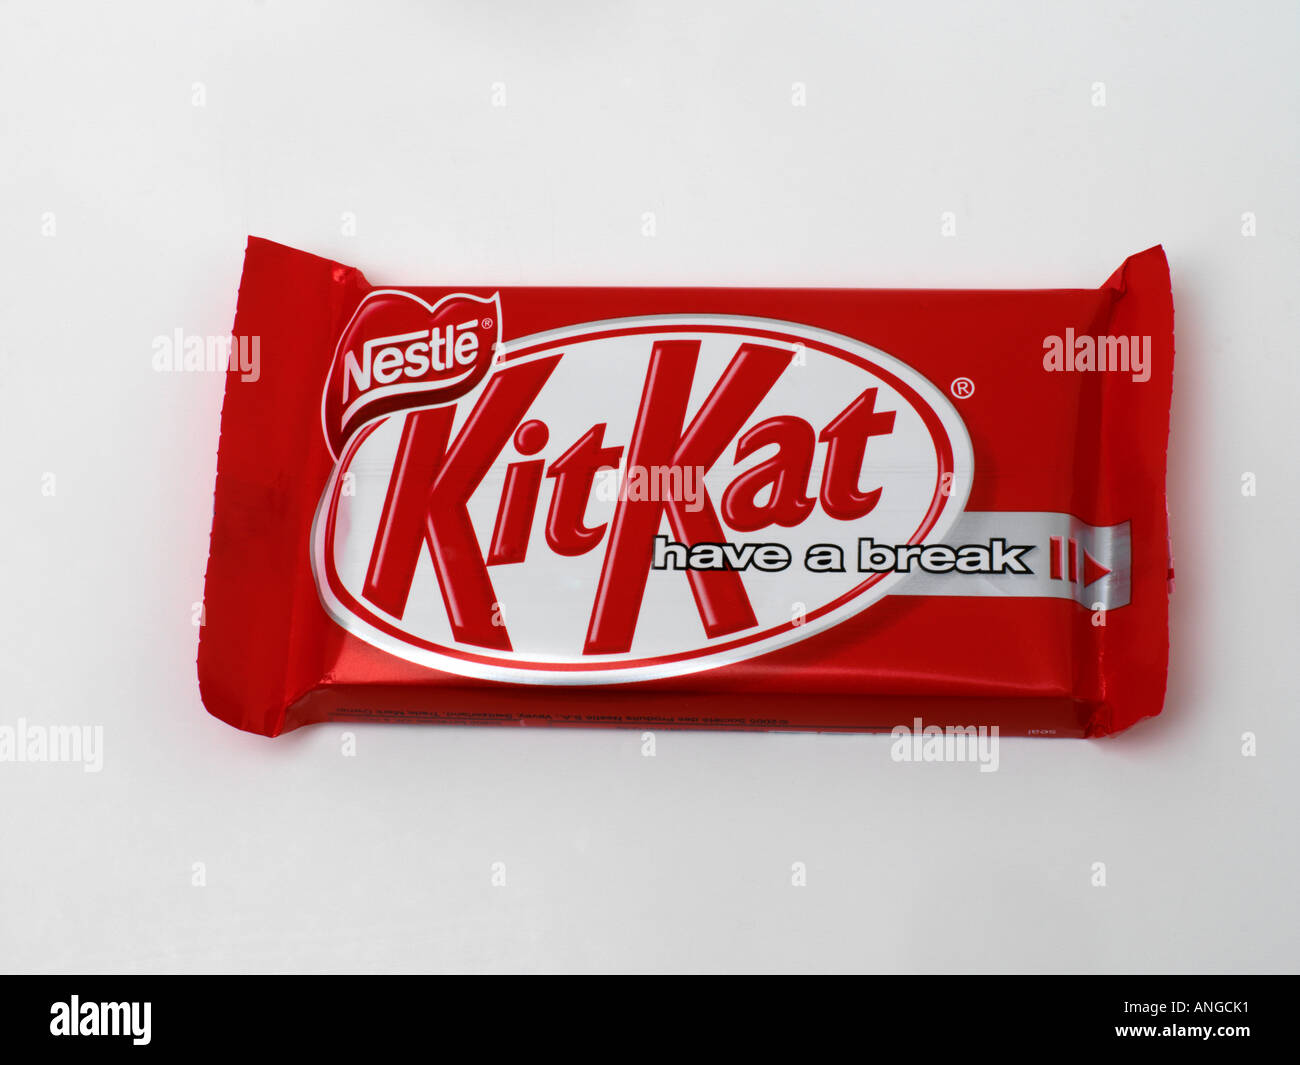 Nestle Kit Kat Have a Break Chocolate Biscuit Bar Stock Photo - Alamy